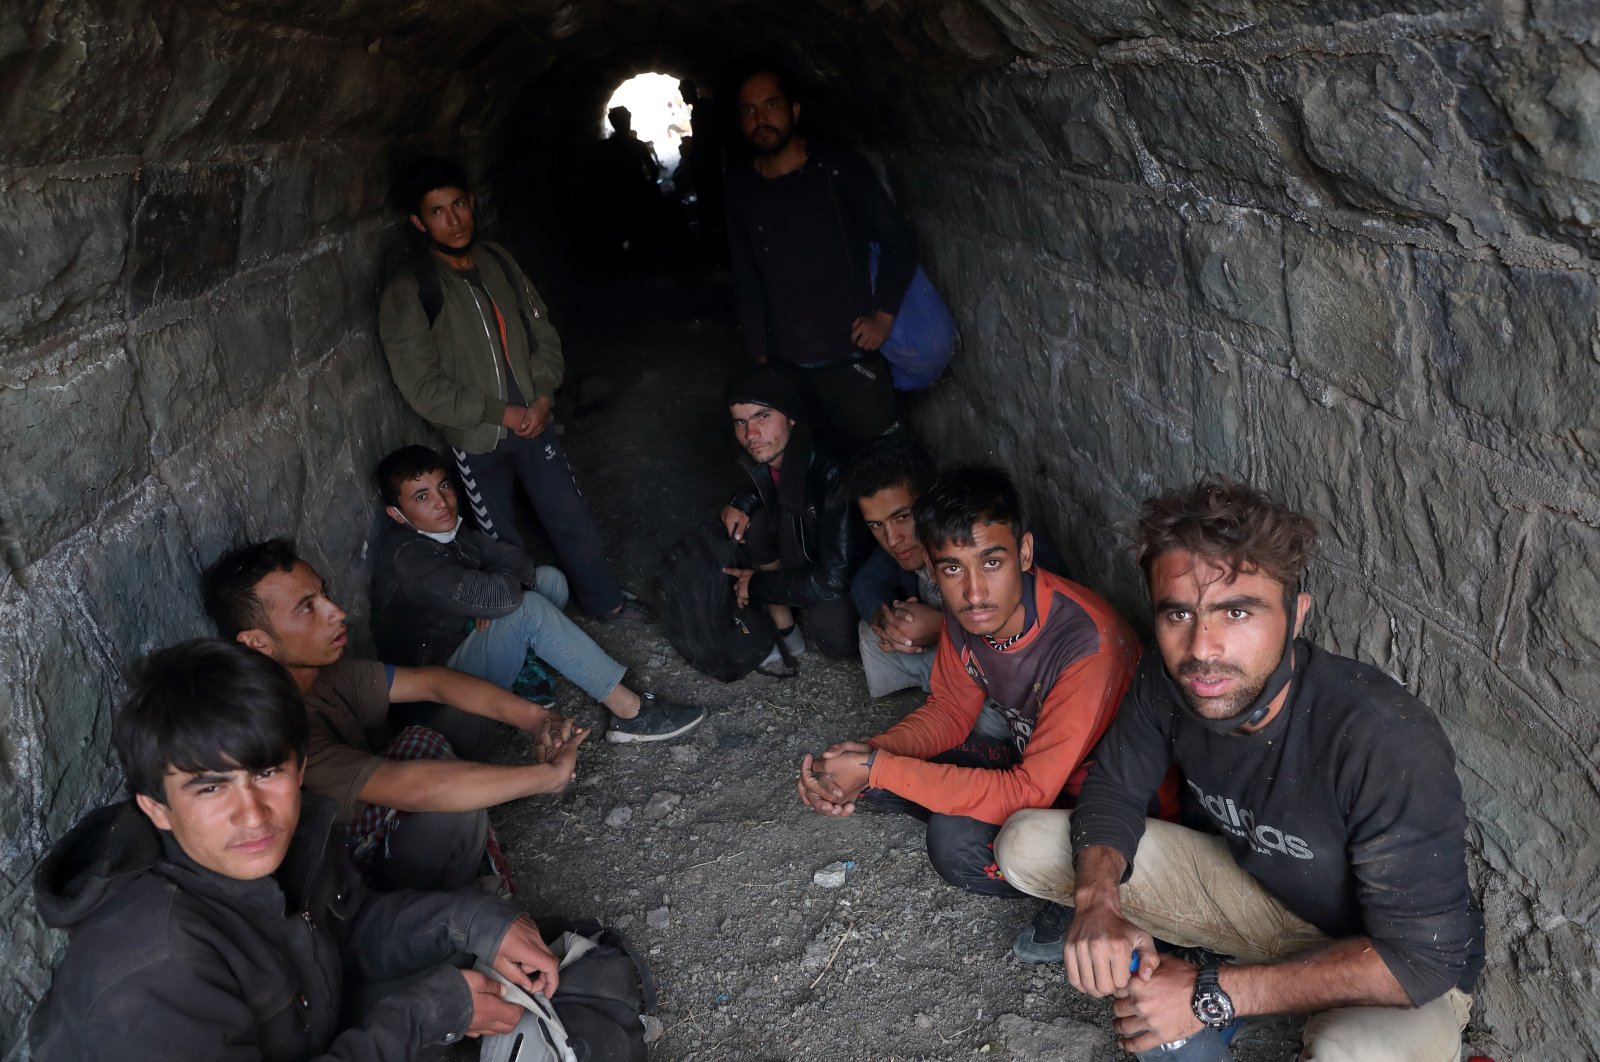 Afghan migrants hide from security forces in a tunnel under train tracks after crossing illegally into Turkey from Iran, near Tatvan in Bitlis province, Turkey, Aug. 23, 2021. (REUTERS Photo)